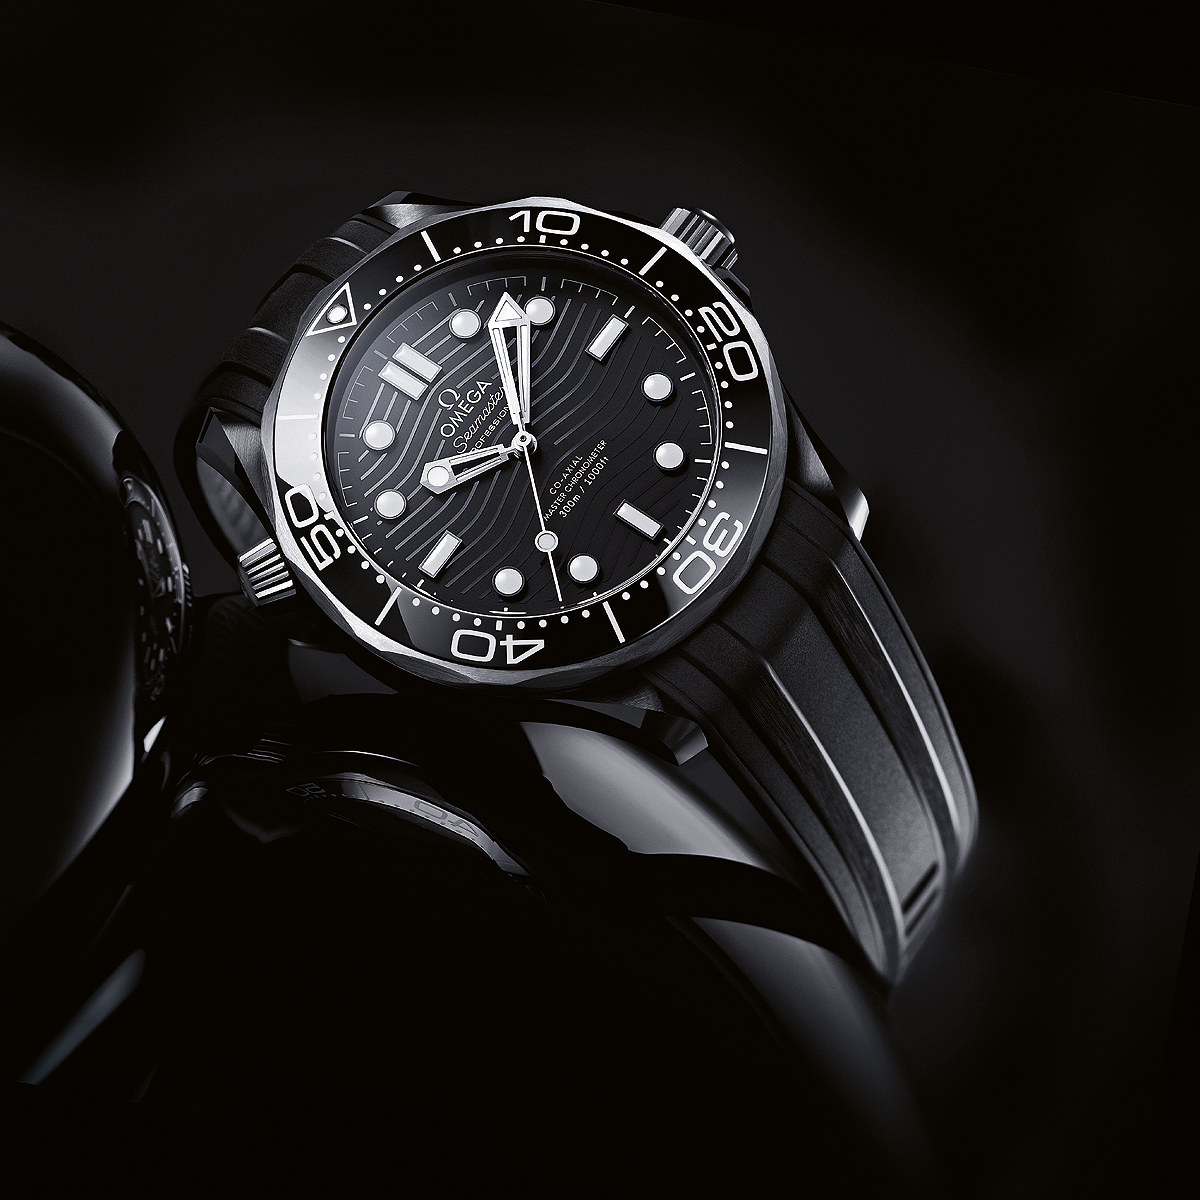 Diving Titan: Reviewing the Omega Seamaster Diver 300M in Black